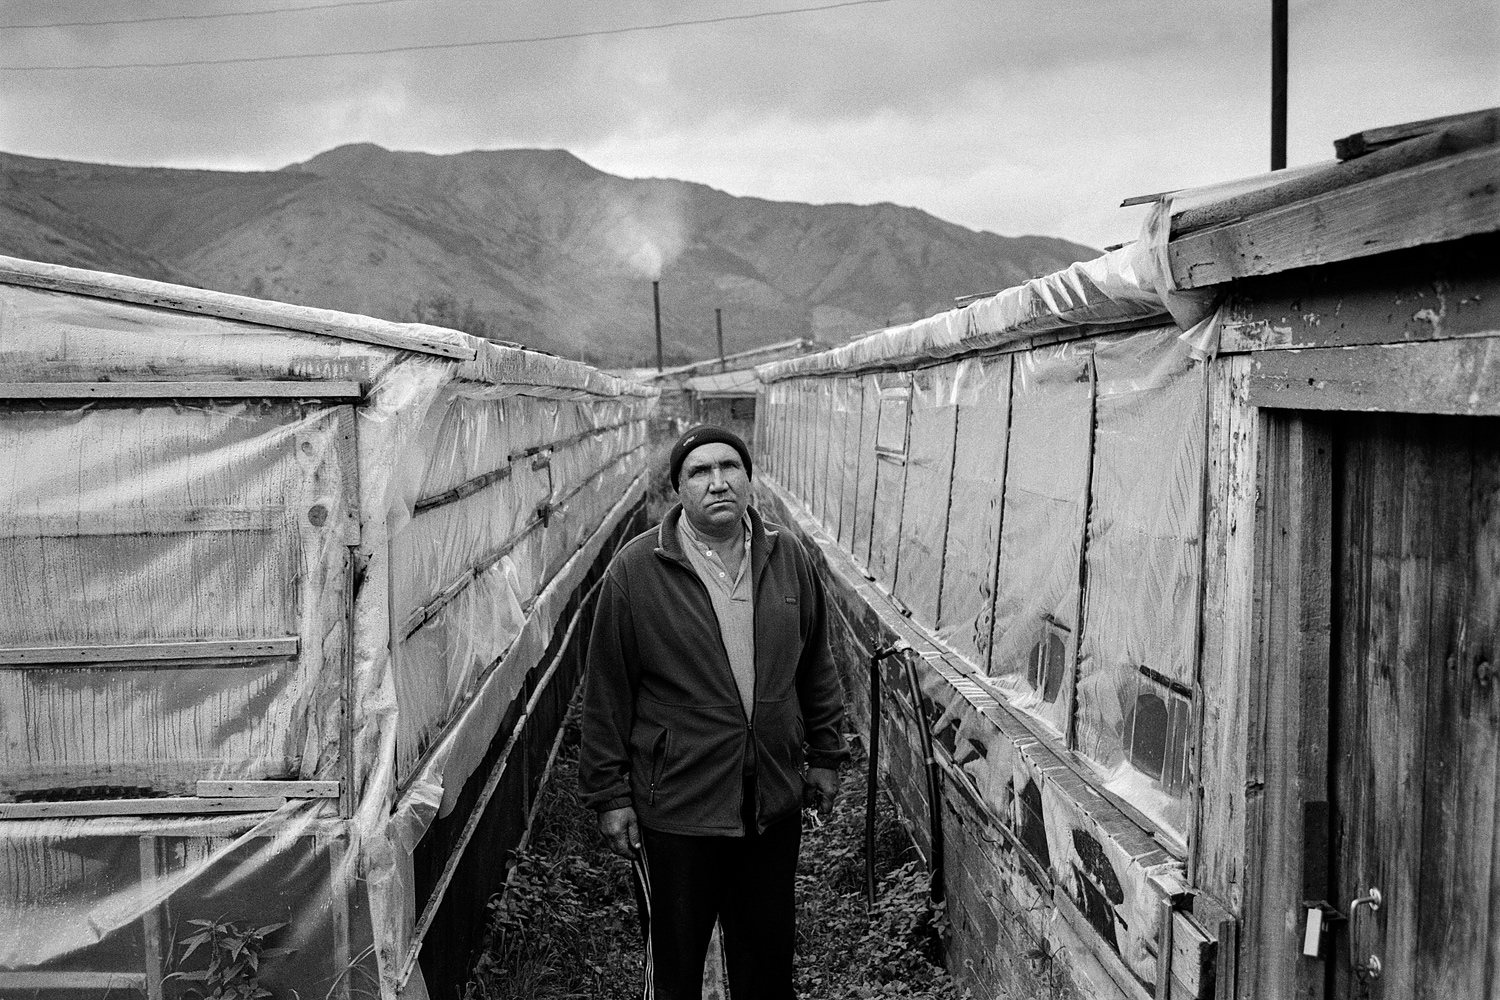 In 1995 the Karamken mining and processing plant was closed down. In 2012 Karamken lost its status of urban-type settlement, and is now in the resettlement list. Valeriy is one of the few remaining residents. He cultivates cucumbers in greenhouses heated with firewood.